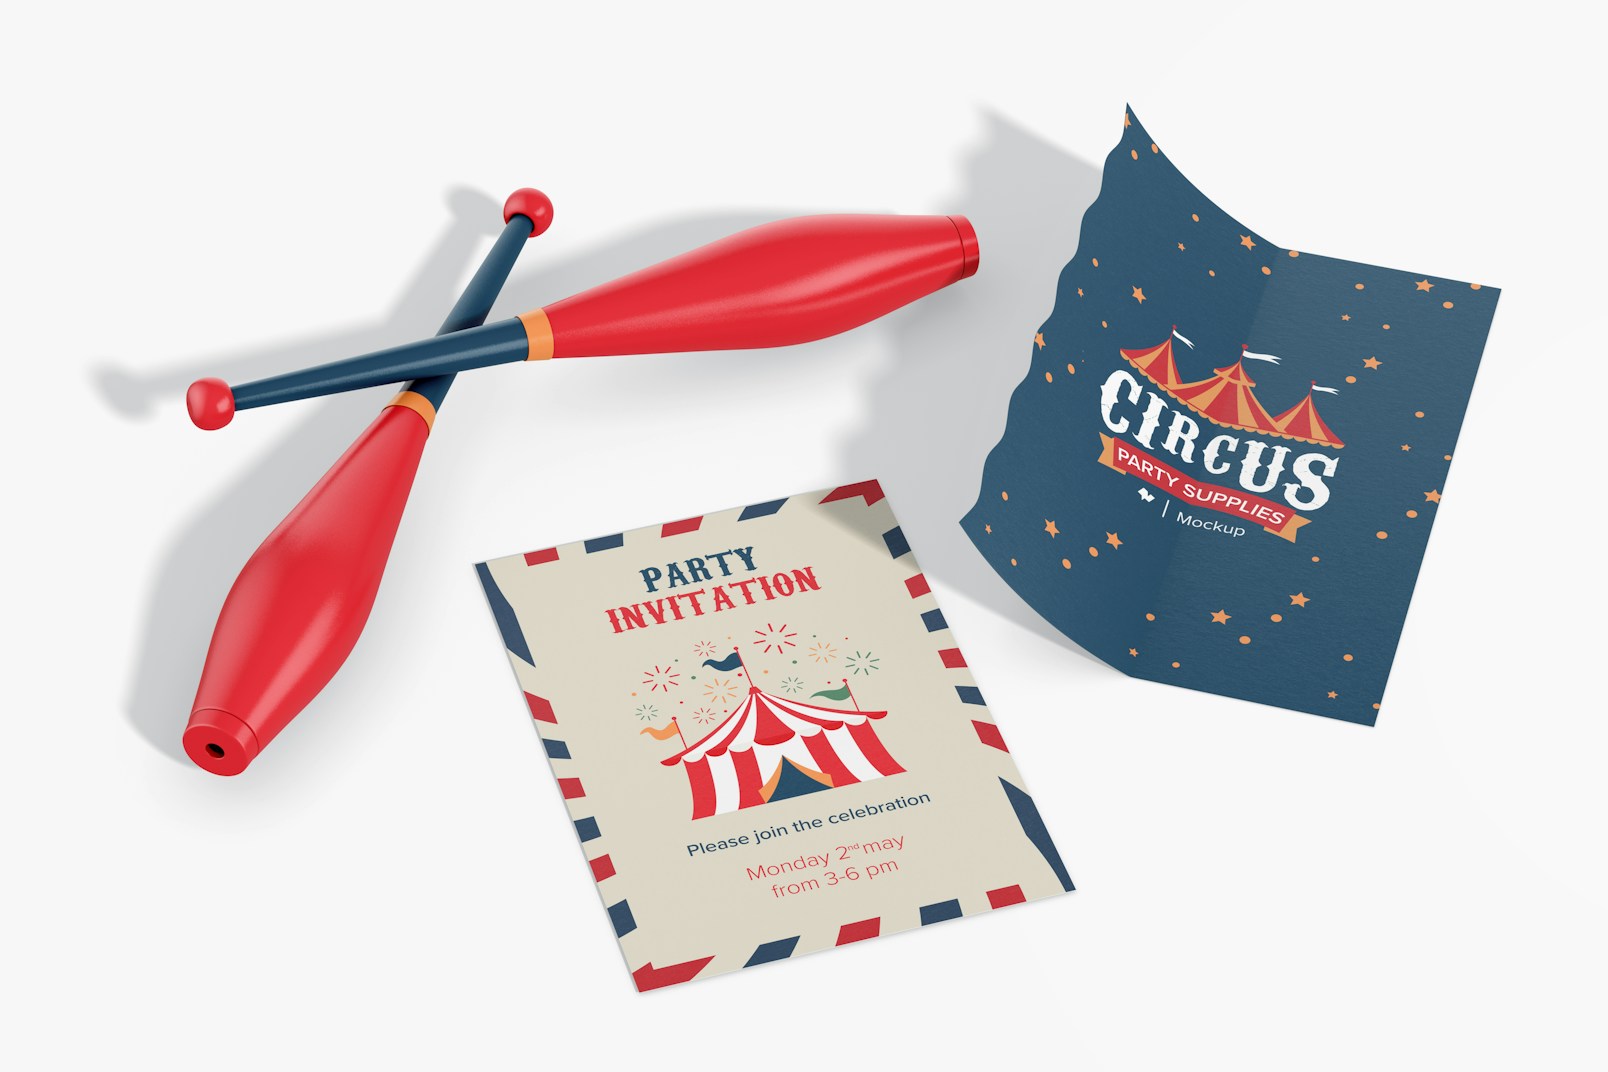 Circus Party Invitation Cards Mockup, High Angle View